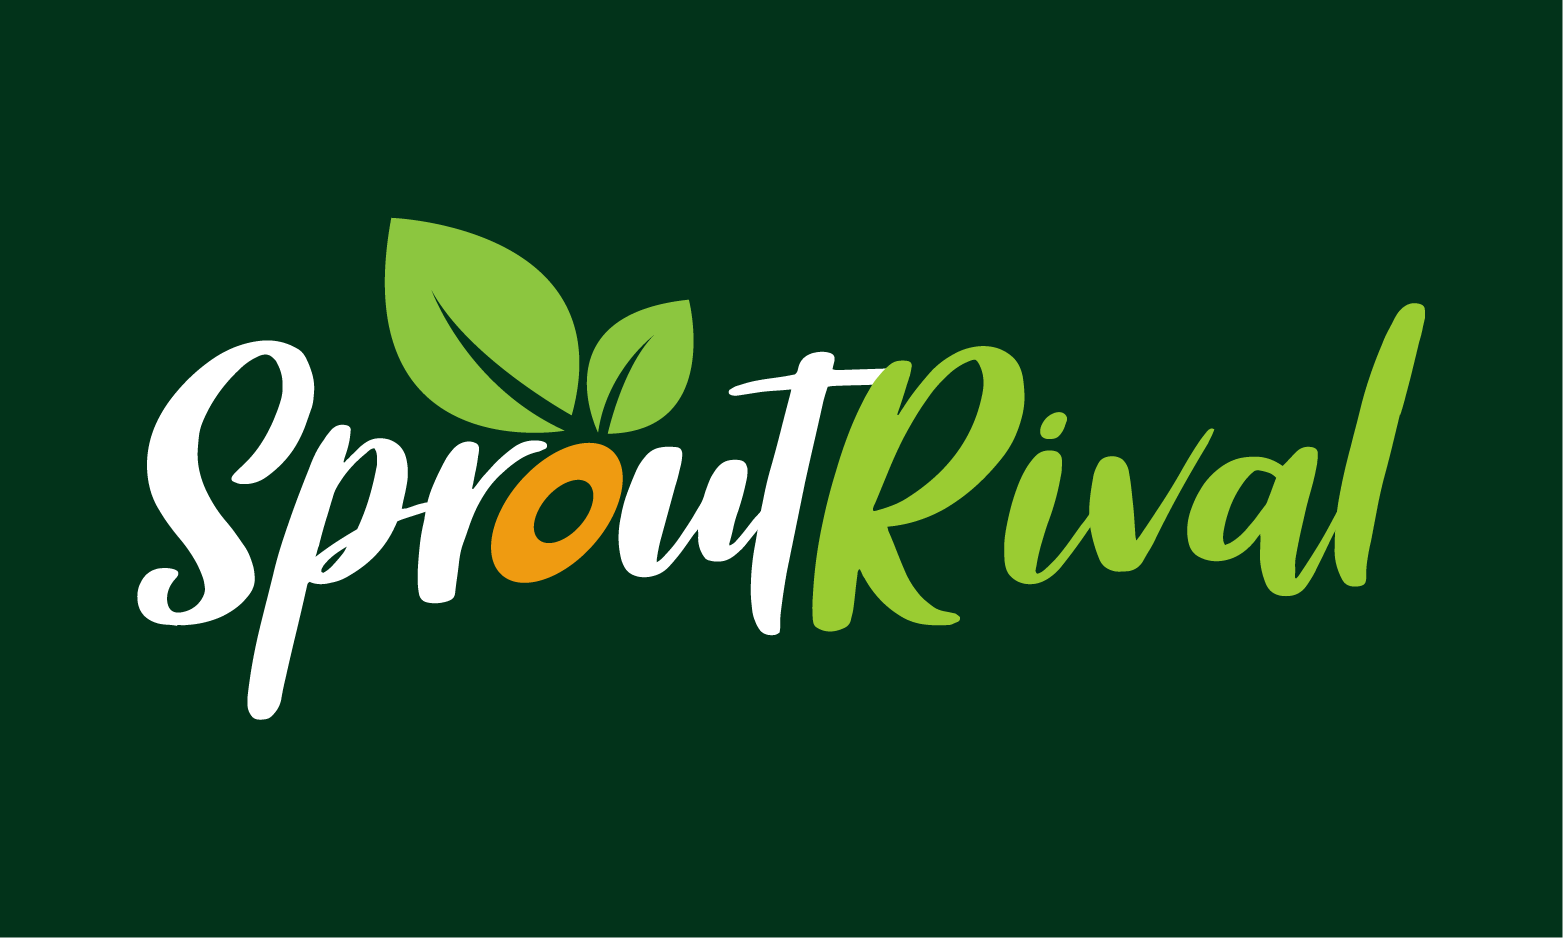 SproutRival.com - Creative brandable domain for sale